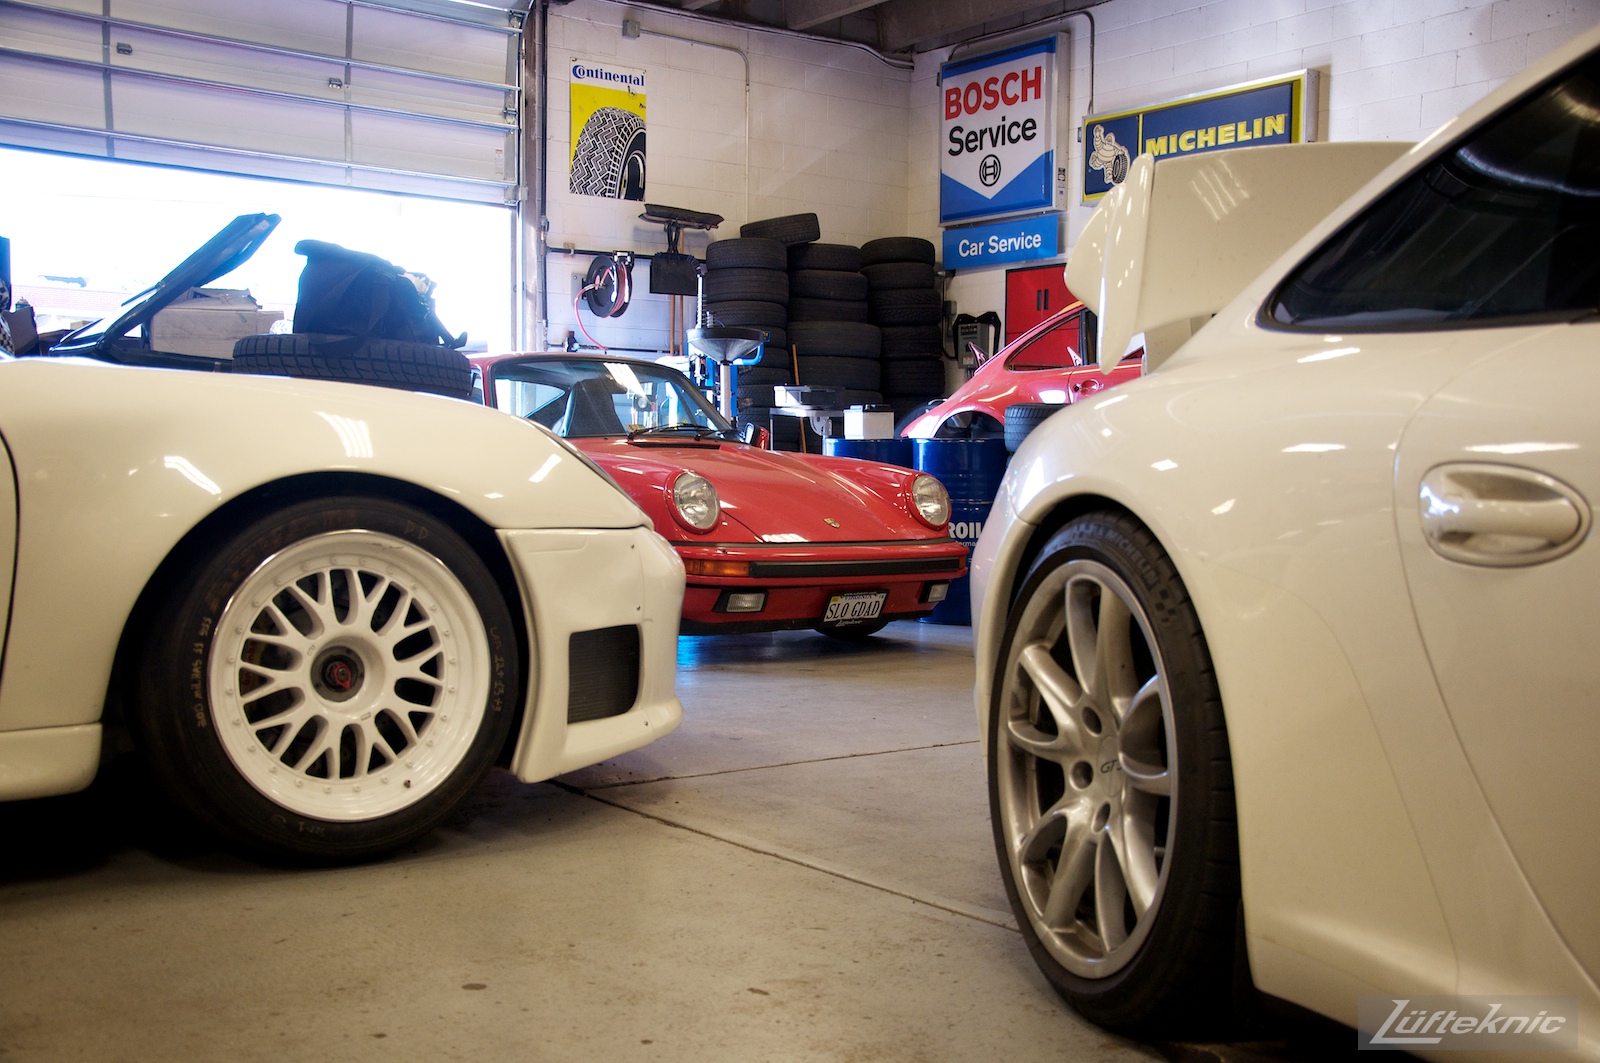 Two white Porsches and one red Porsche inside the Lufteknic shop.